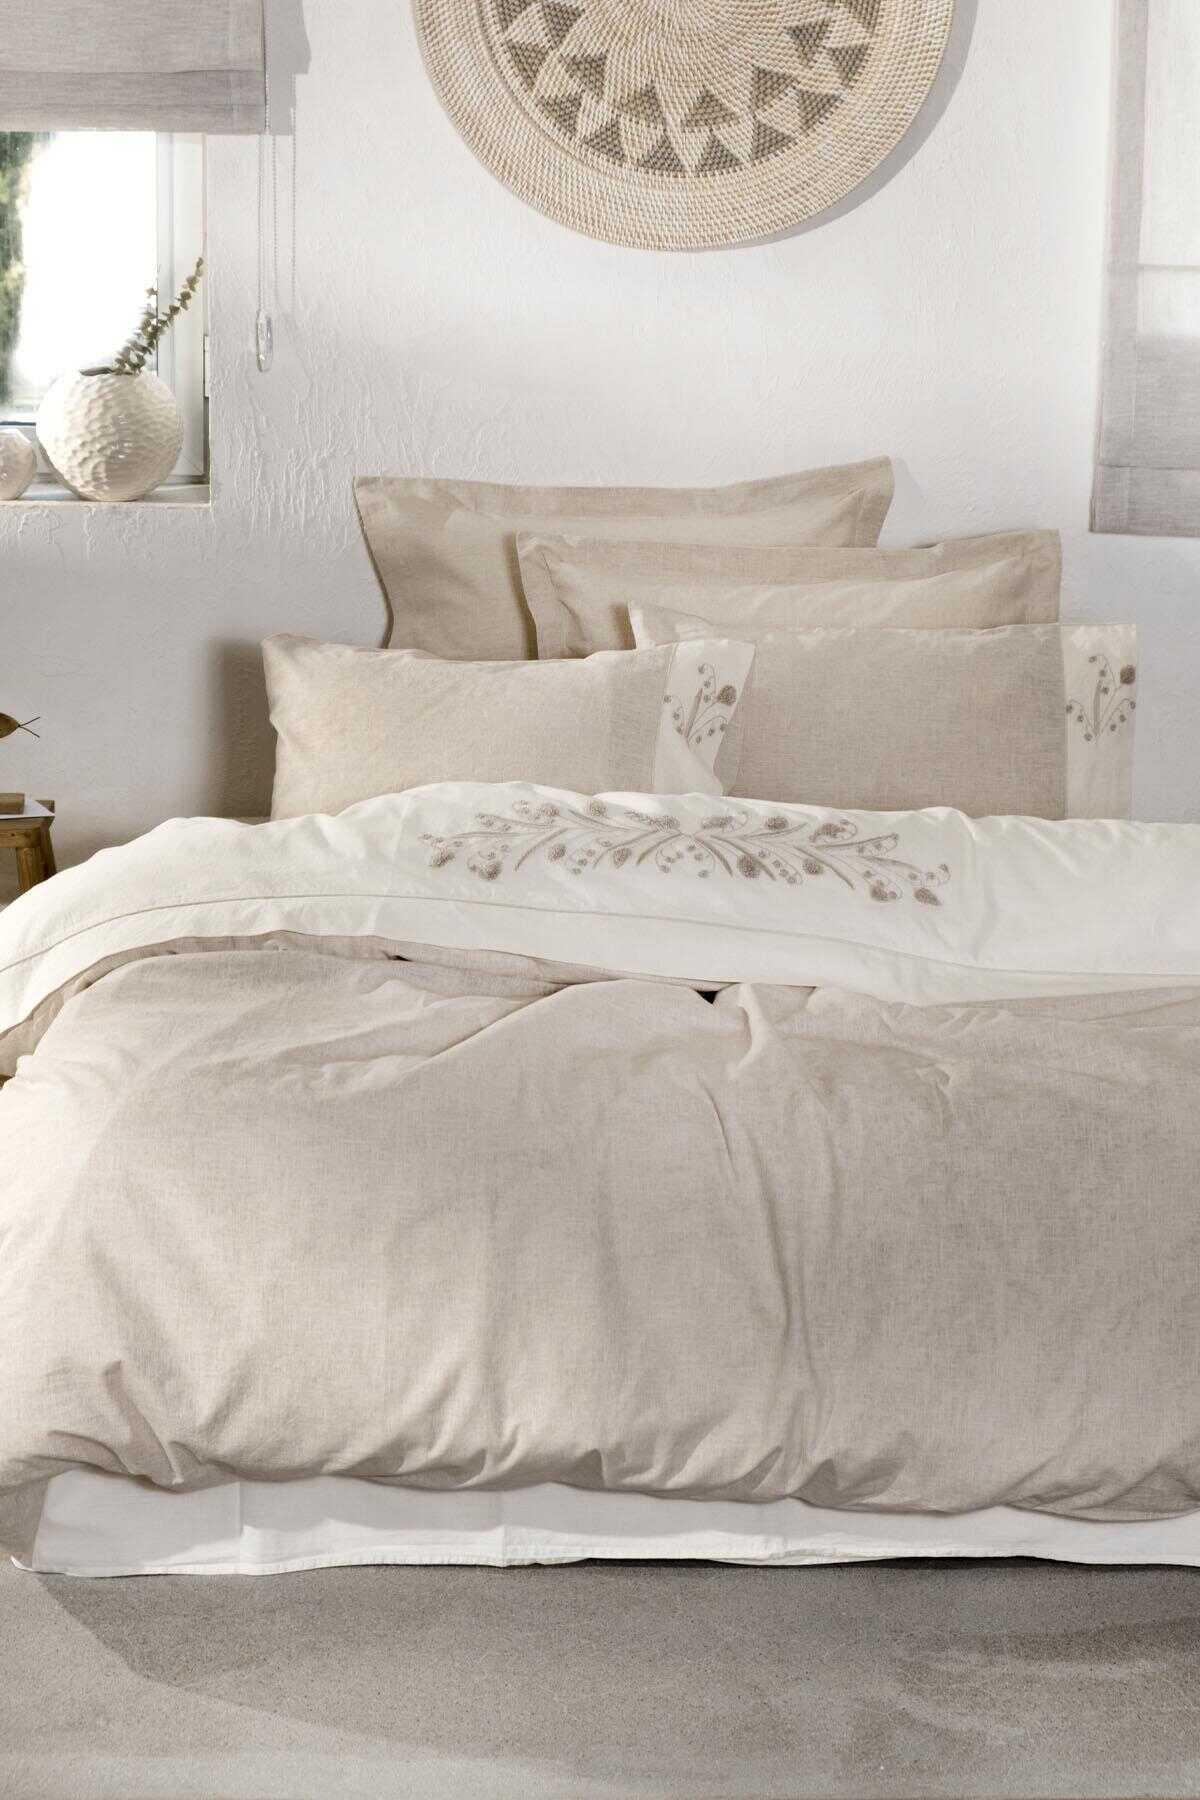 Ecocotton Lilya Organic Cotton Linen Embroidered Double Duvet Cover Set